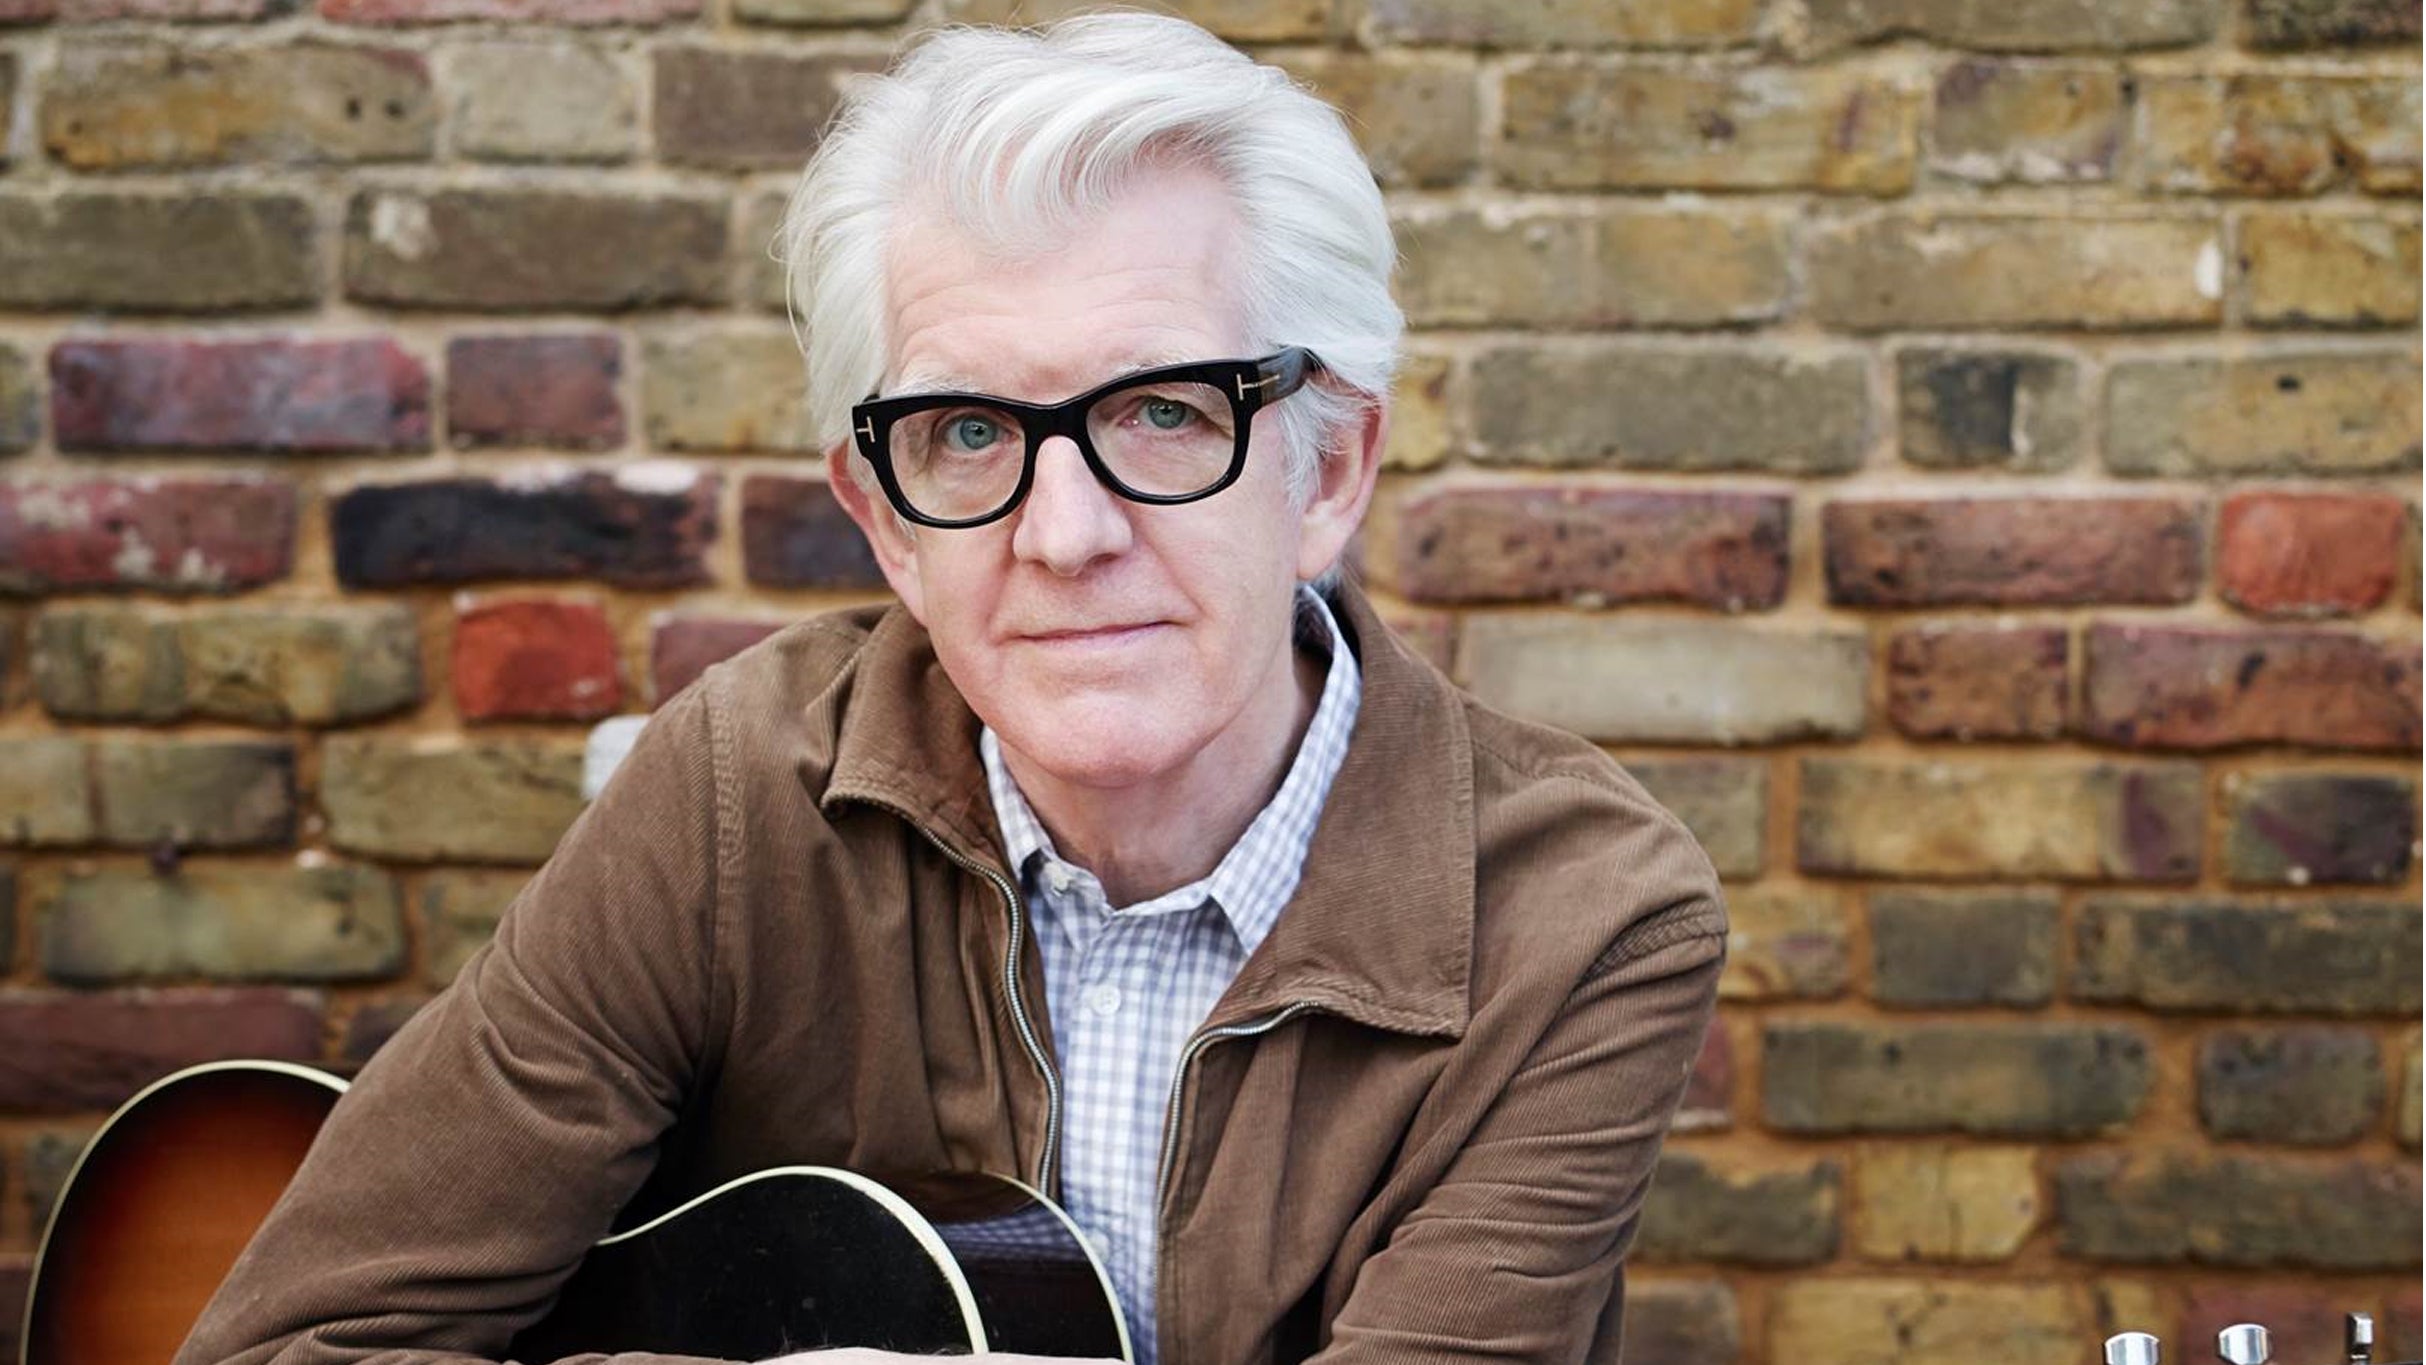 An Evening With Nick Lowe & Ron Sexsmith presale password for advance tickets in Vancouver